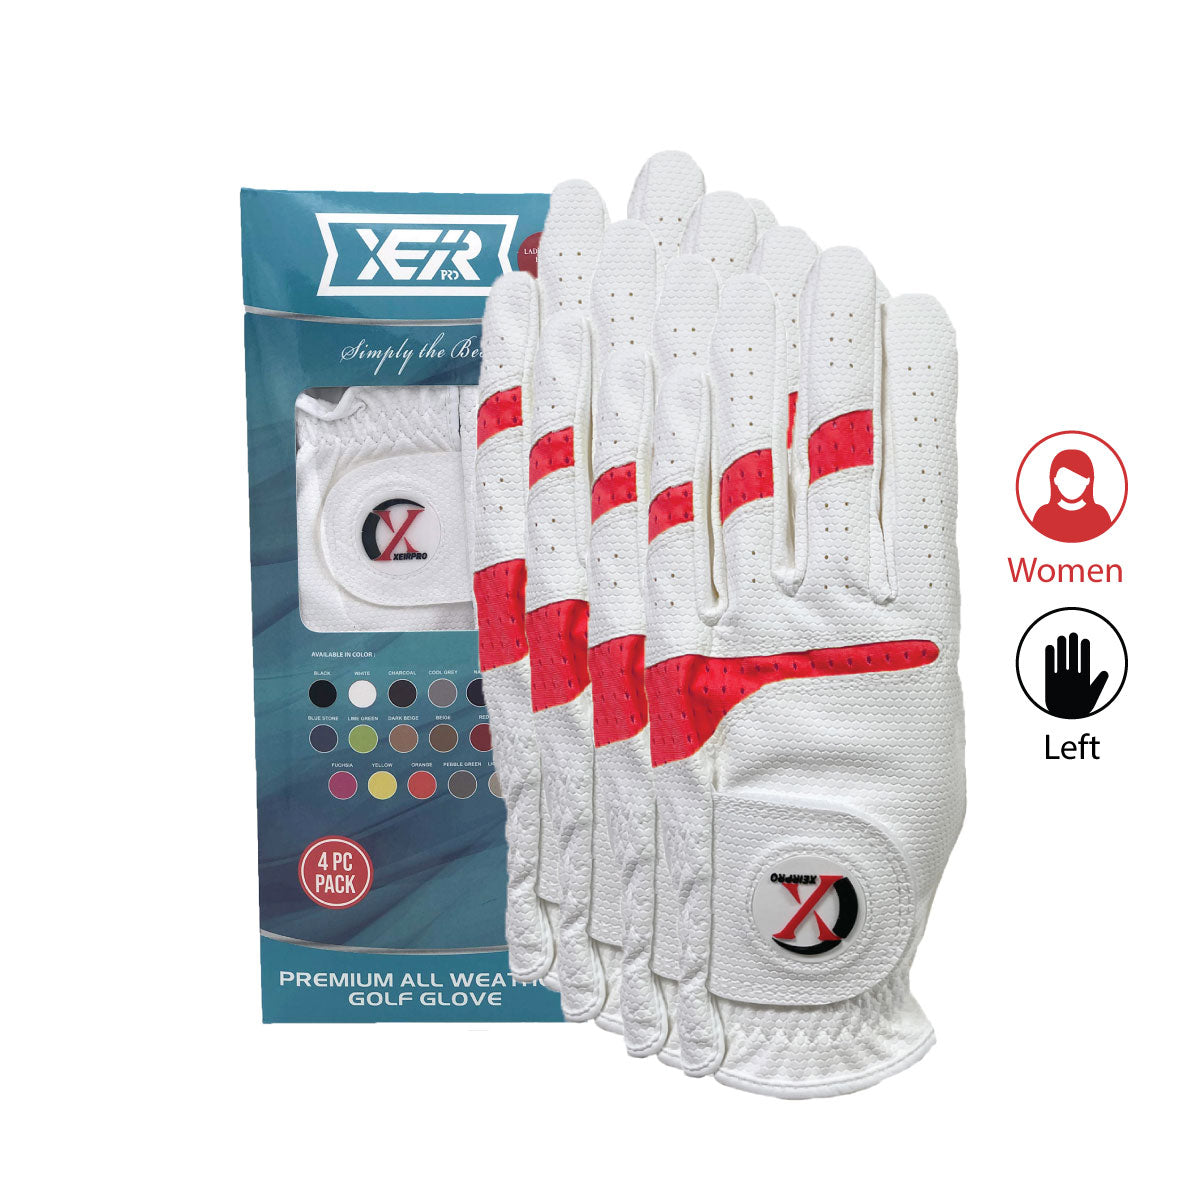 XEIR PRO Premium All Weather Golf Gloves 4 Pack for Women Worn On Left –  xeirsports